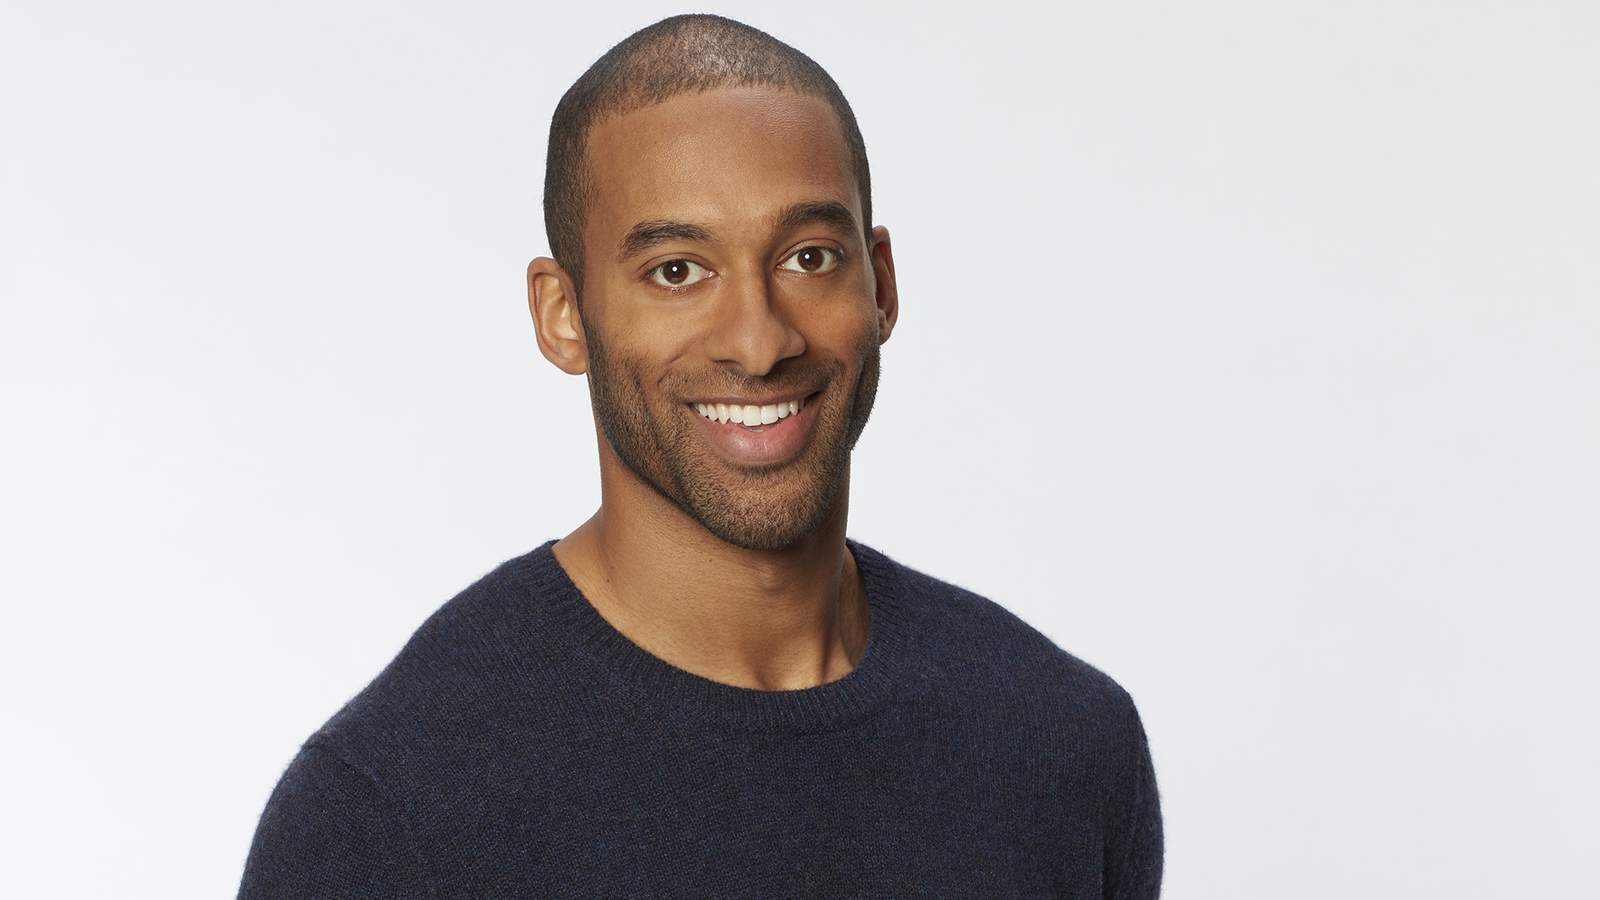 The Bachelor announces Matt James as its first black lead following outcry for diversity